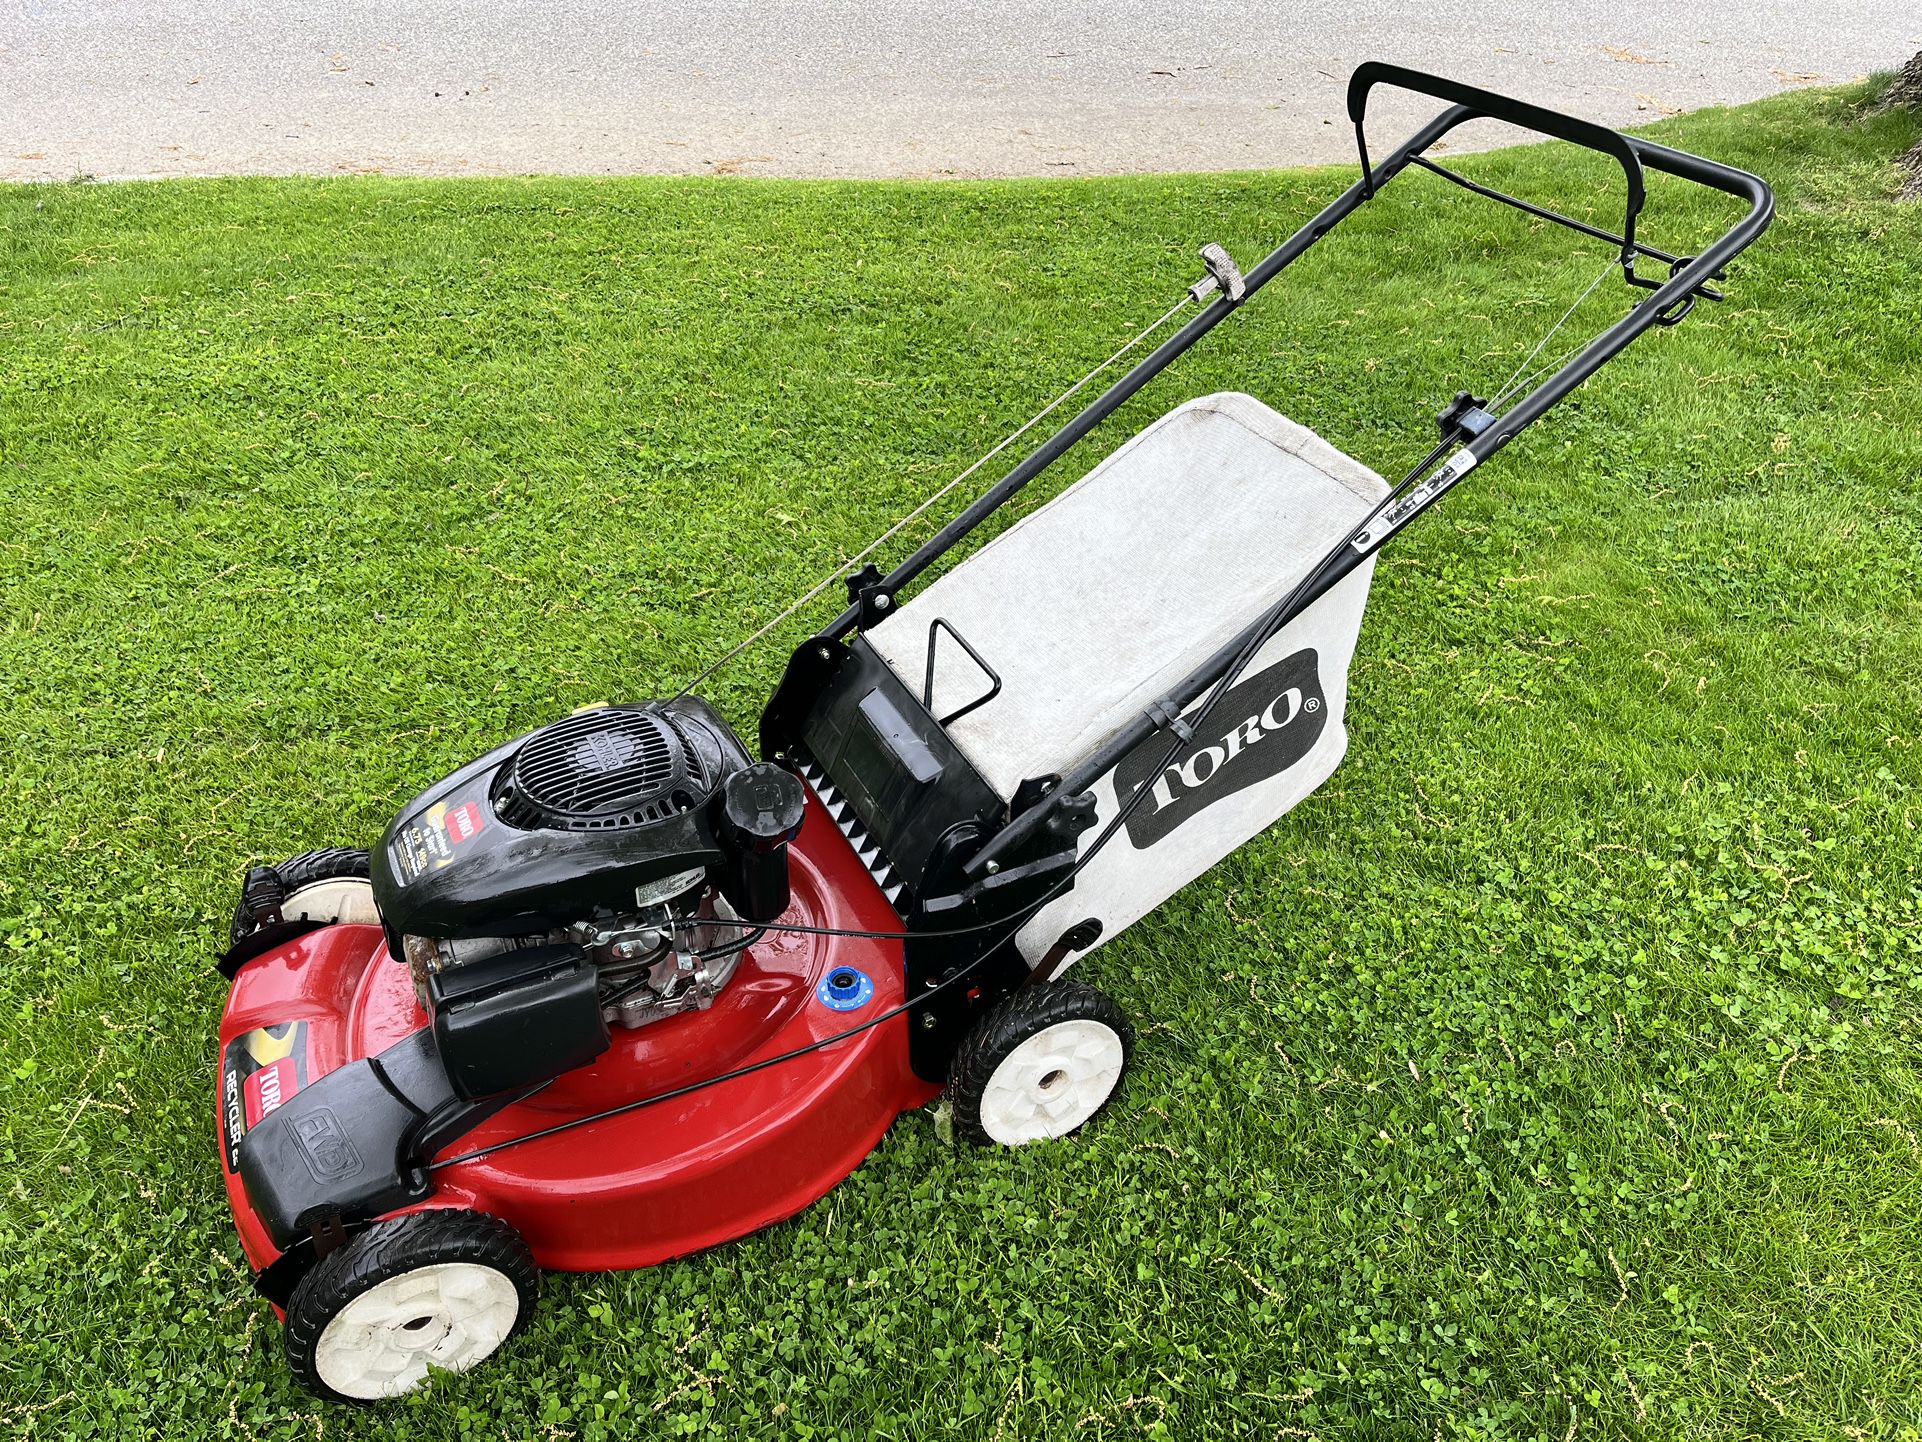 TORO 22” RECYCLER FRONT SELF PROPELLED XT675 KOHLER ENGINE LAWNMOWER WITH BAGGER